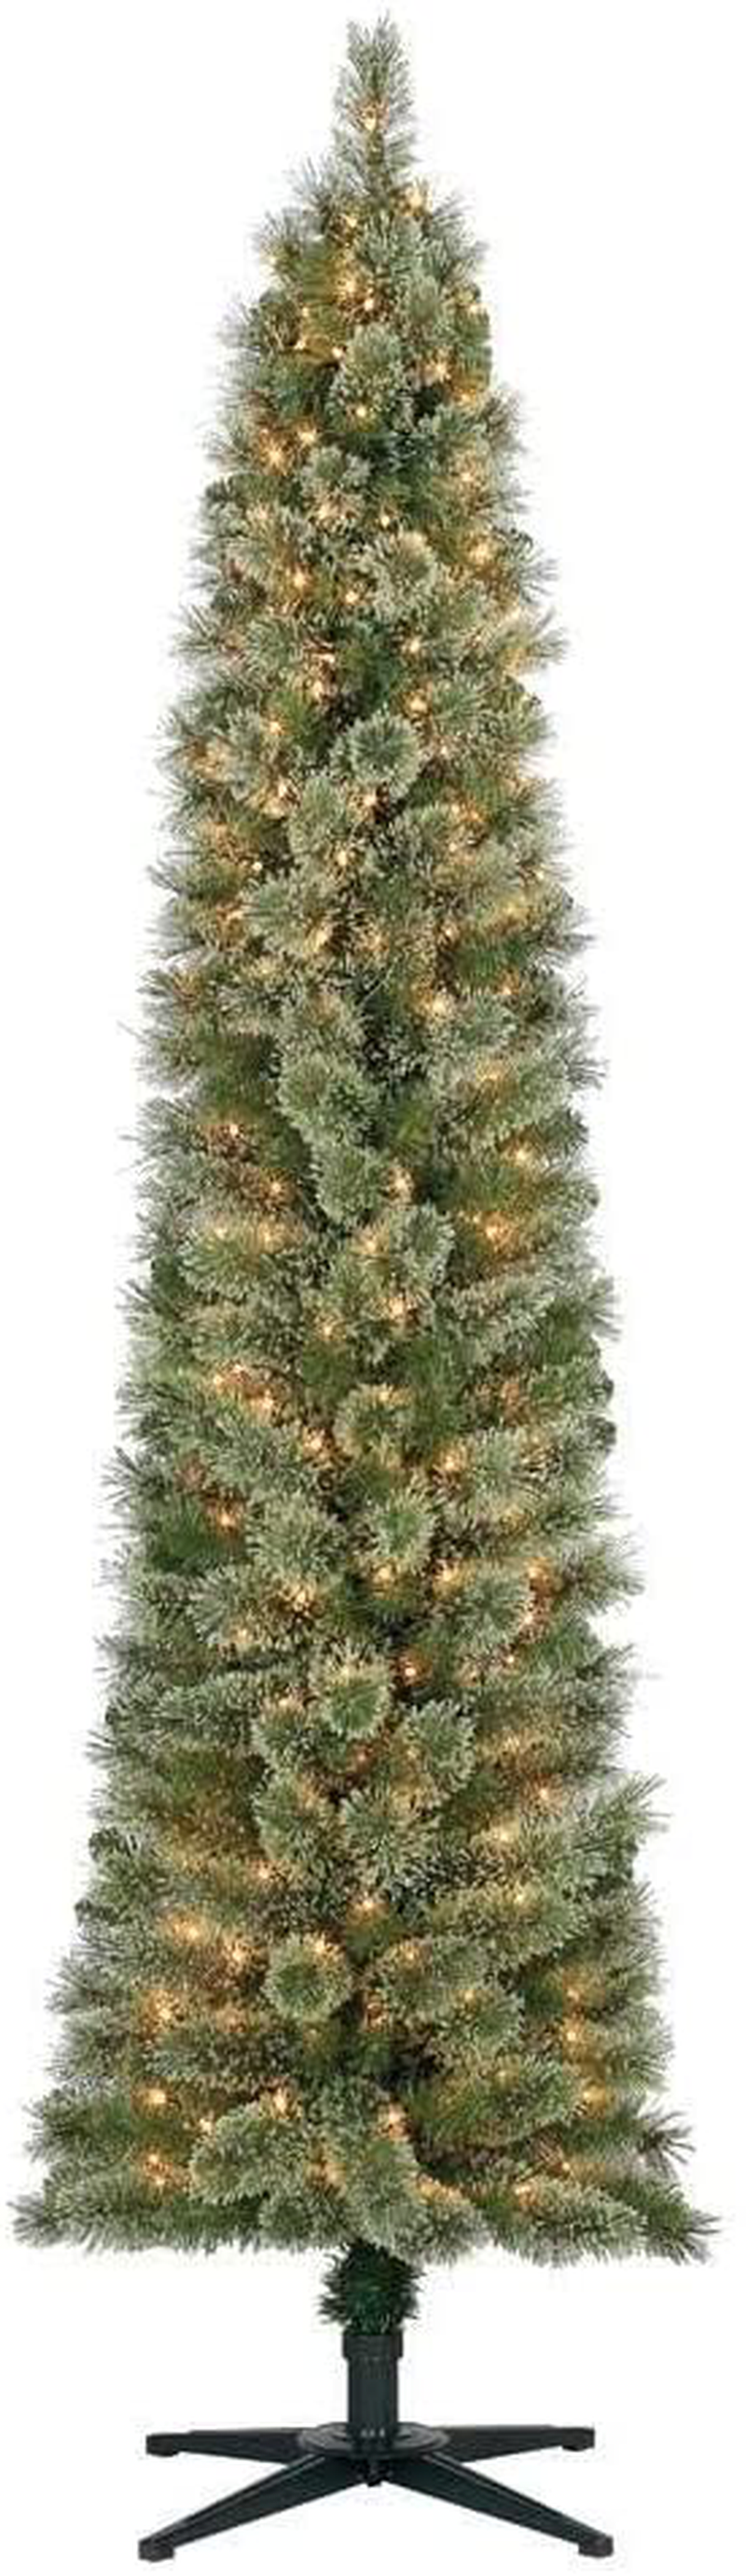 Home Heritage 7 Foot Pre-Lit Skinny Artificial Stanley Pencil Pine Christmas Tree with Clear White Lights, Foldable Stand and Easy Assembly Home & Garden > Decor > Seasonal & Holiday Decorations > Christmas Tree Stands Home Heritage Clear Lights 7 Foot 